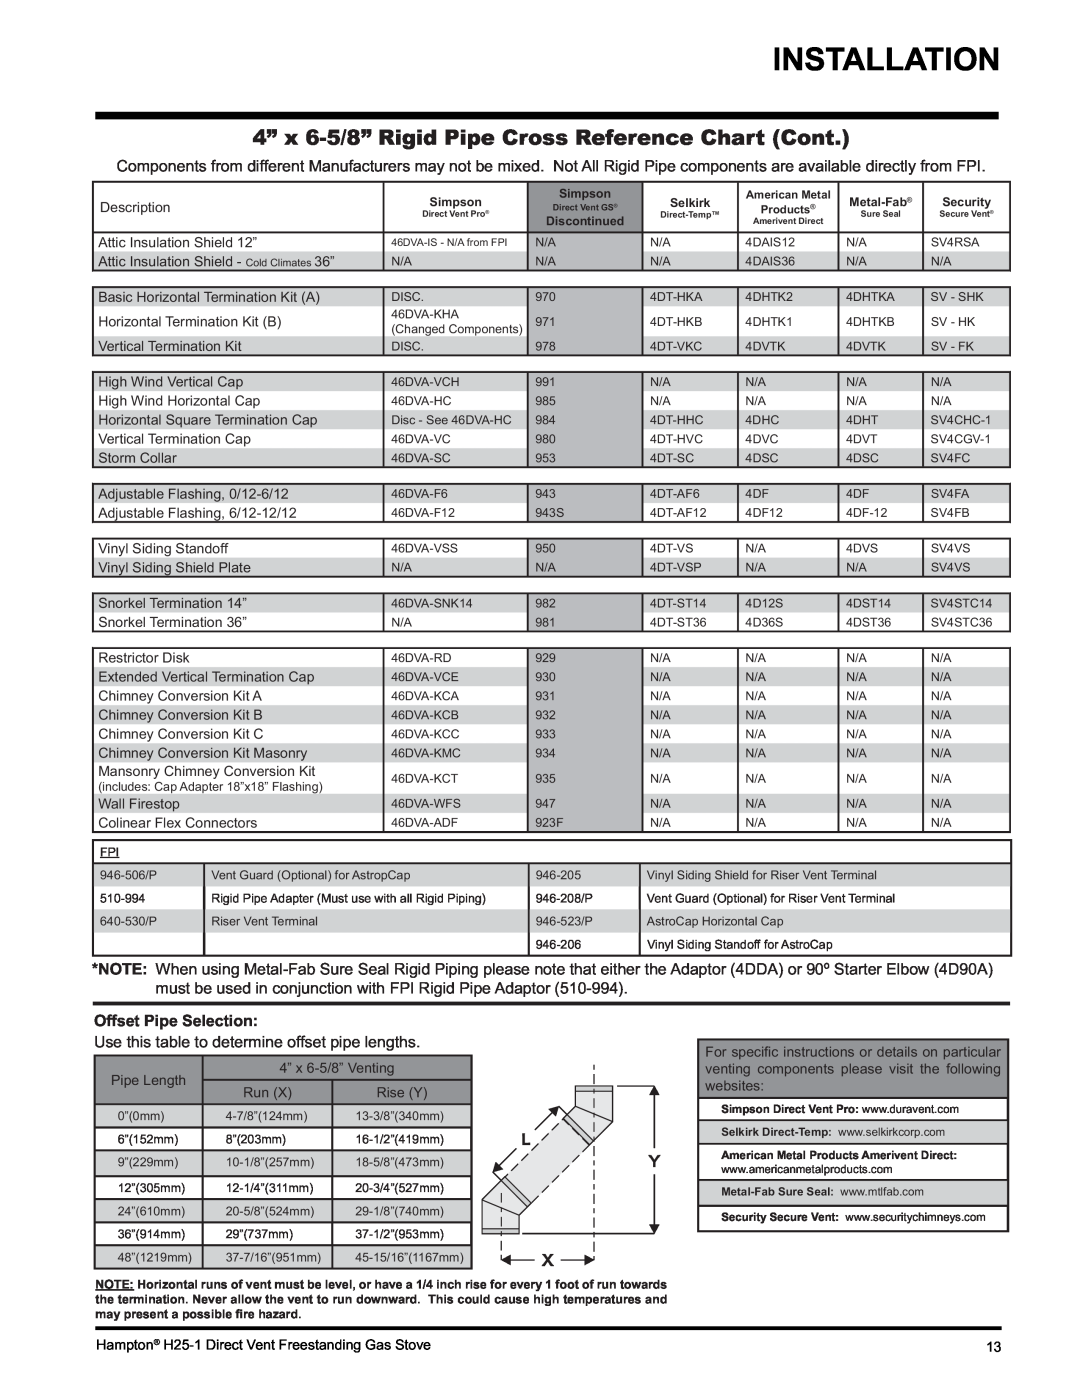 Hampton Direct H25-LP1 Propane, H25-NG1, H25-LP1 4” x 6-5/8”Rigid Pipe Cross Reference Chart Cont, Offset Pipe Selection 